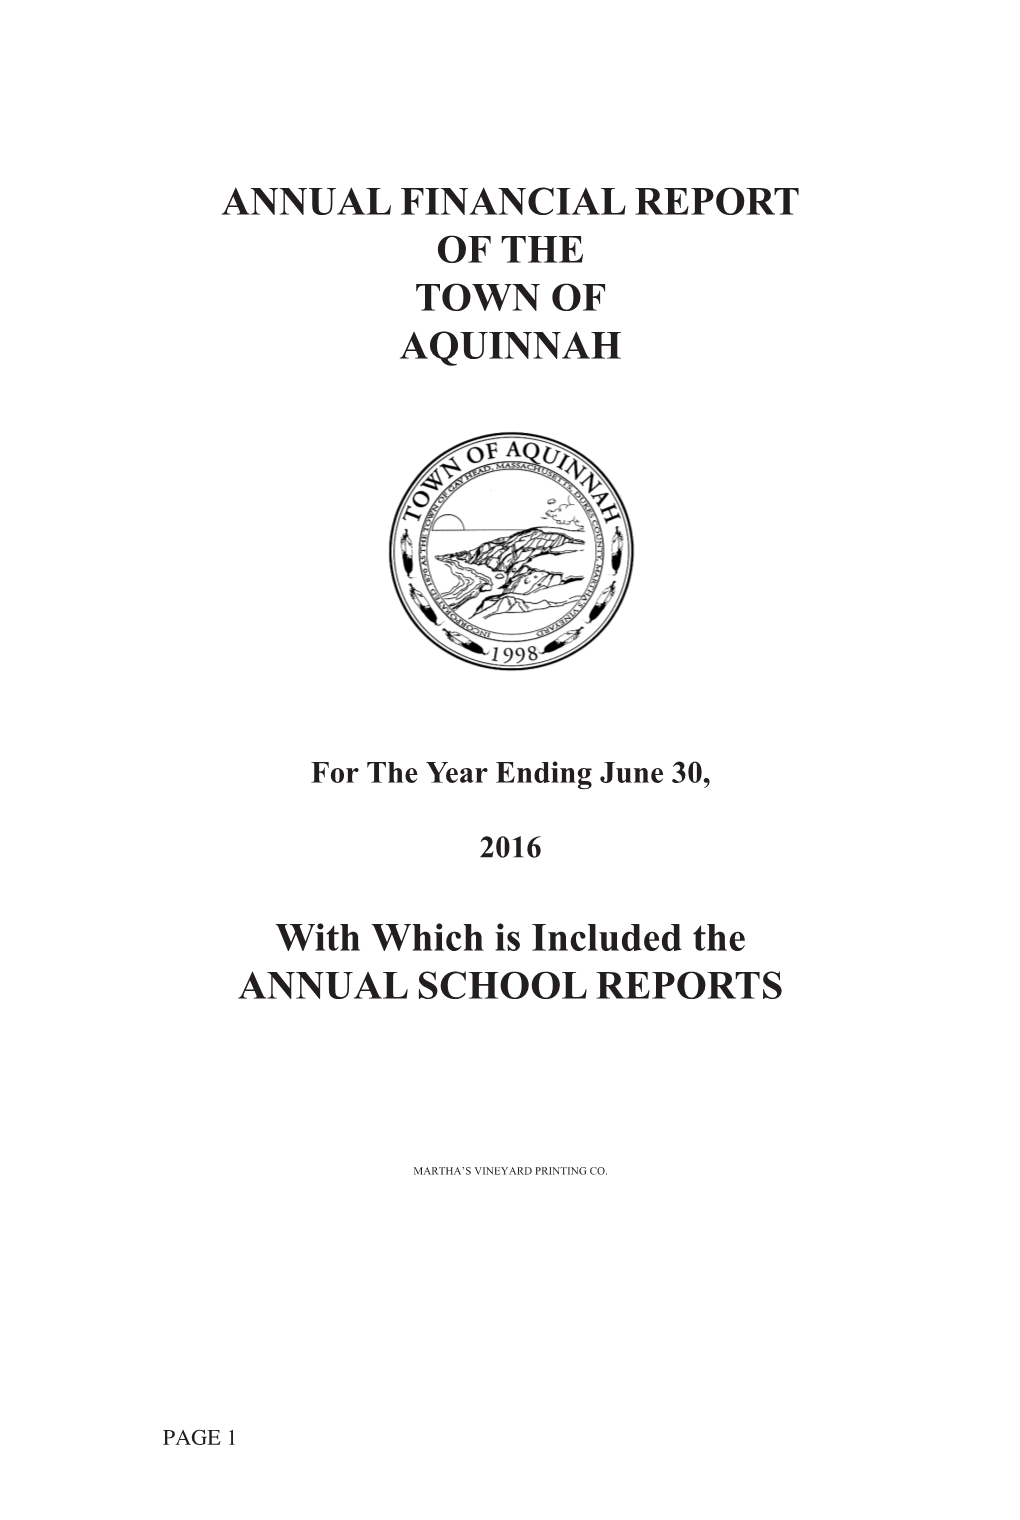 Town Report FY 2016